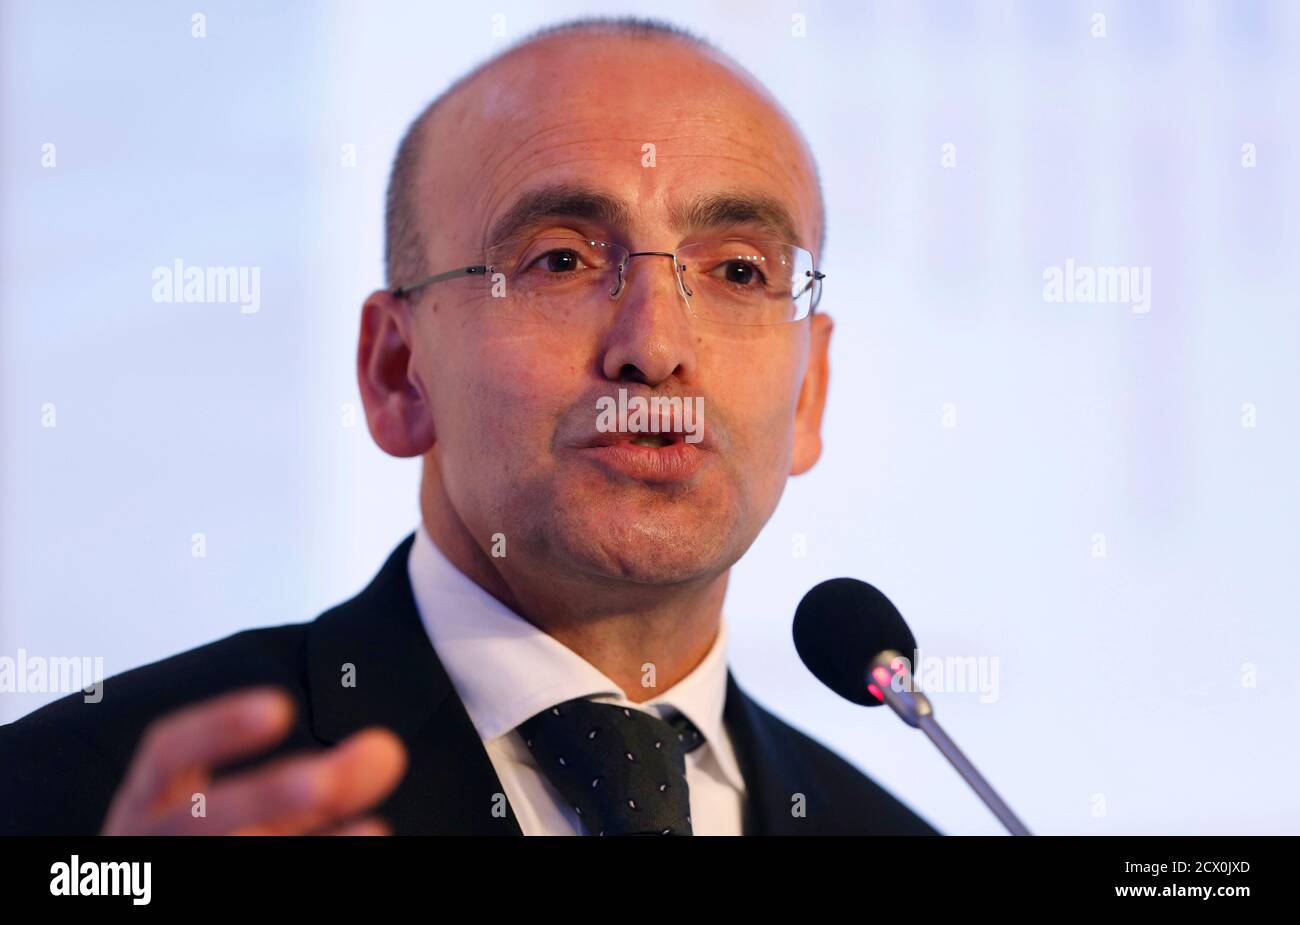 Turkey's Finance Minister Mehmet Simsek speaks during the 4th Istanbul Finance Summit in Istanbul September 19, 2013. Turkey will get only brief relief from the surprise postponement of a reduction in U.S. economic stimulus and must press ahead with plans to rebalance its own economy, Simsek said on Thursday. To match Interview TURKEY-ECONOMY/ REUTERS/Murad Sezer (TURKEY - Tags: POLITICS BUSINESS) Stock Photo